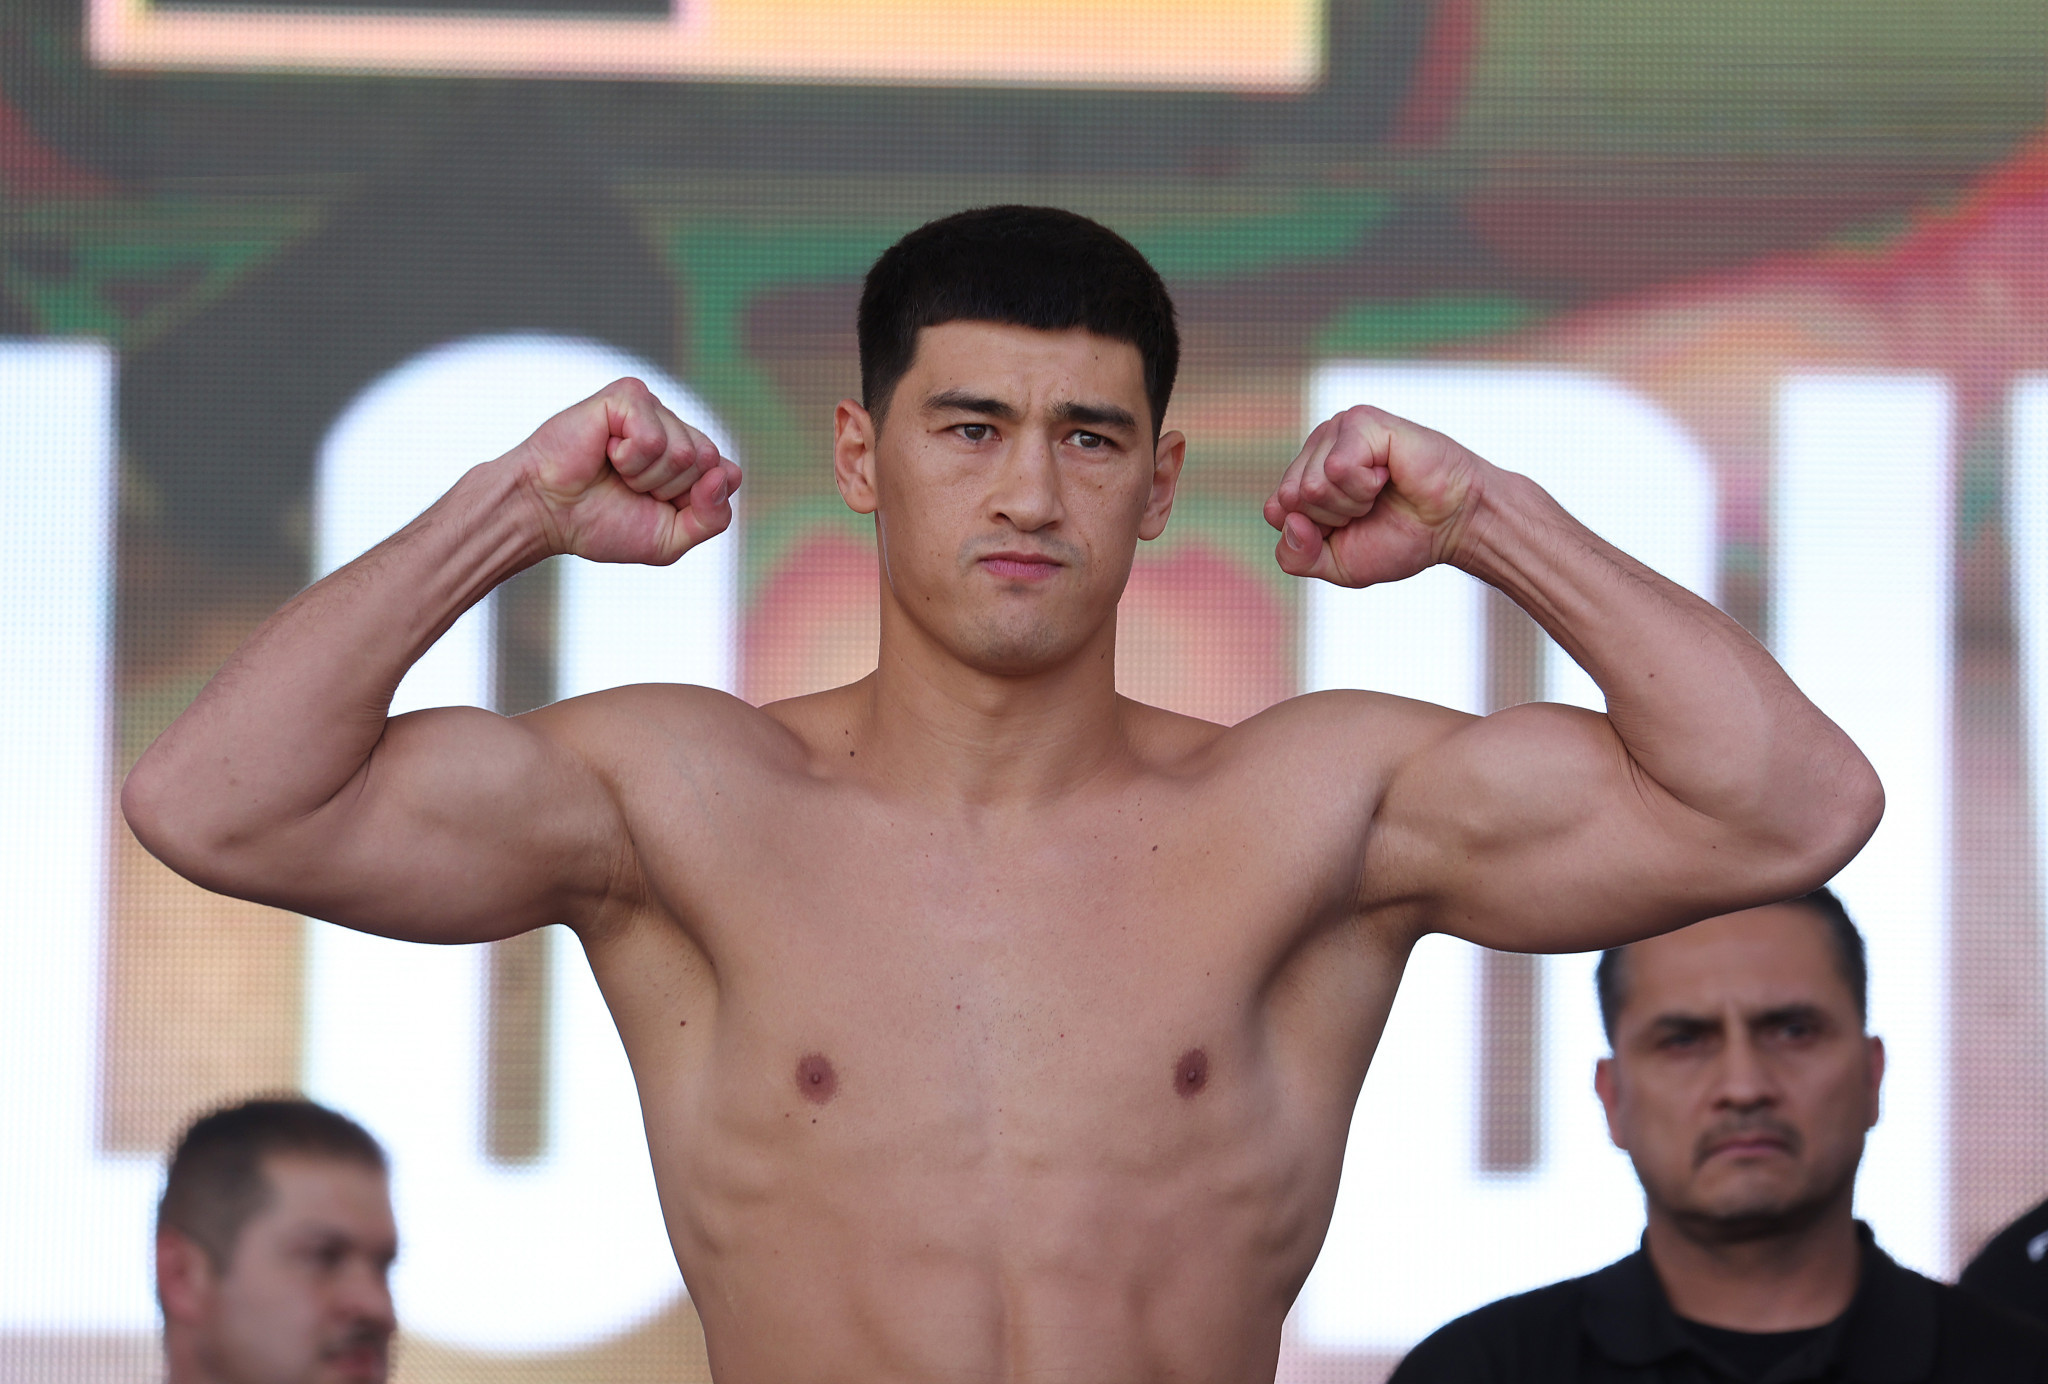 Russia's Dmitry Bivol is set to defend his WBA light-heavyweight title against Mexico's Canelo Álvarez ©Getty Images